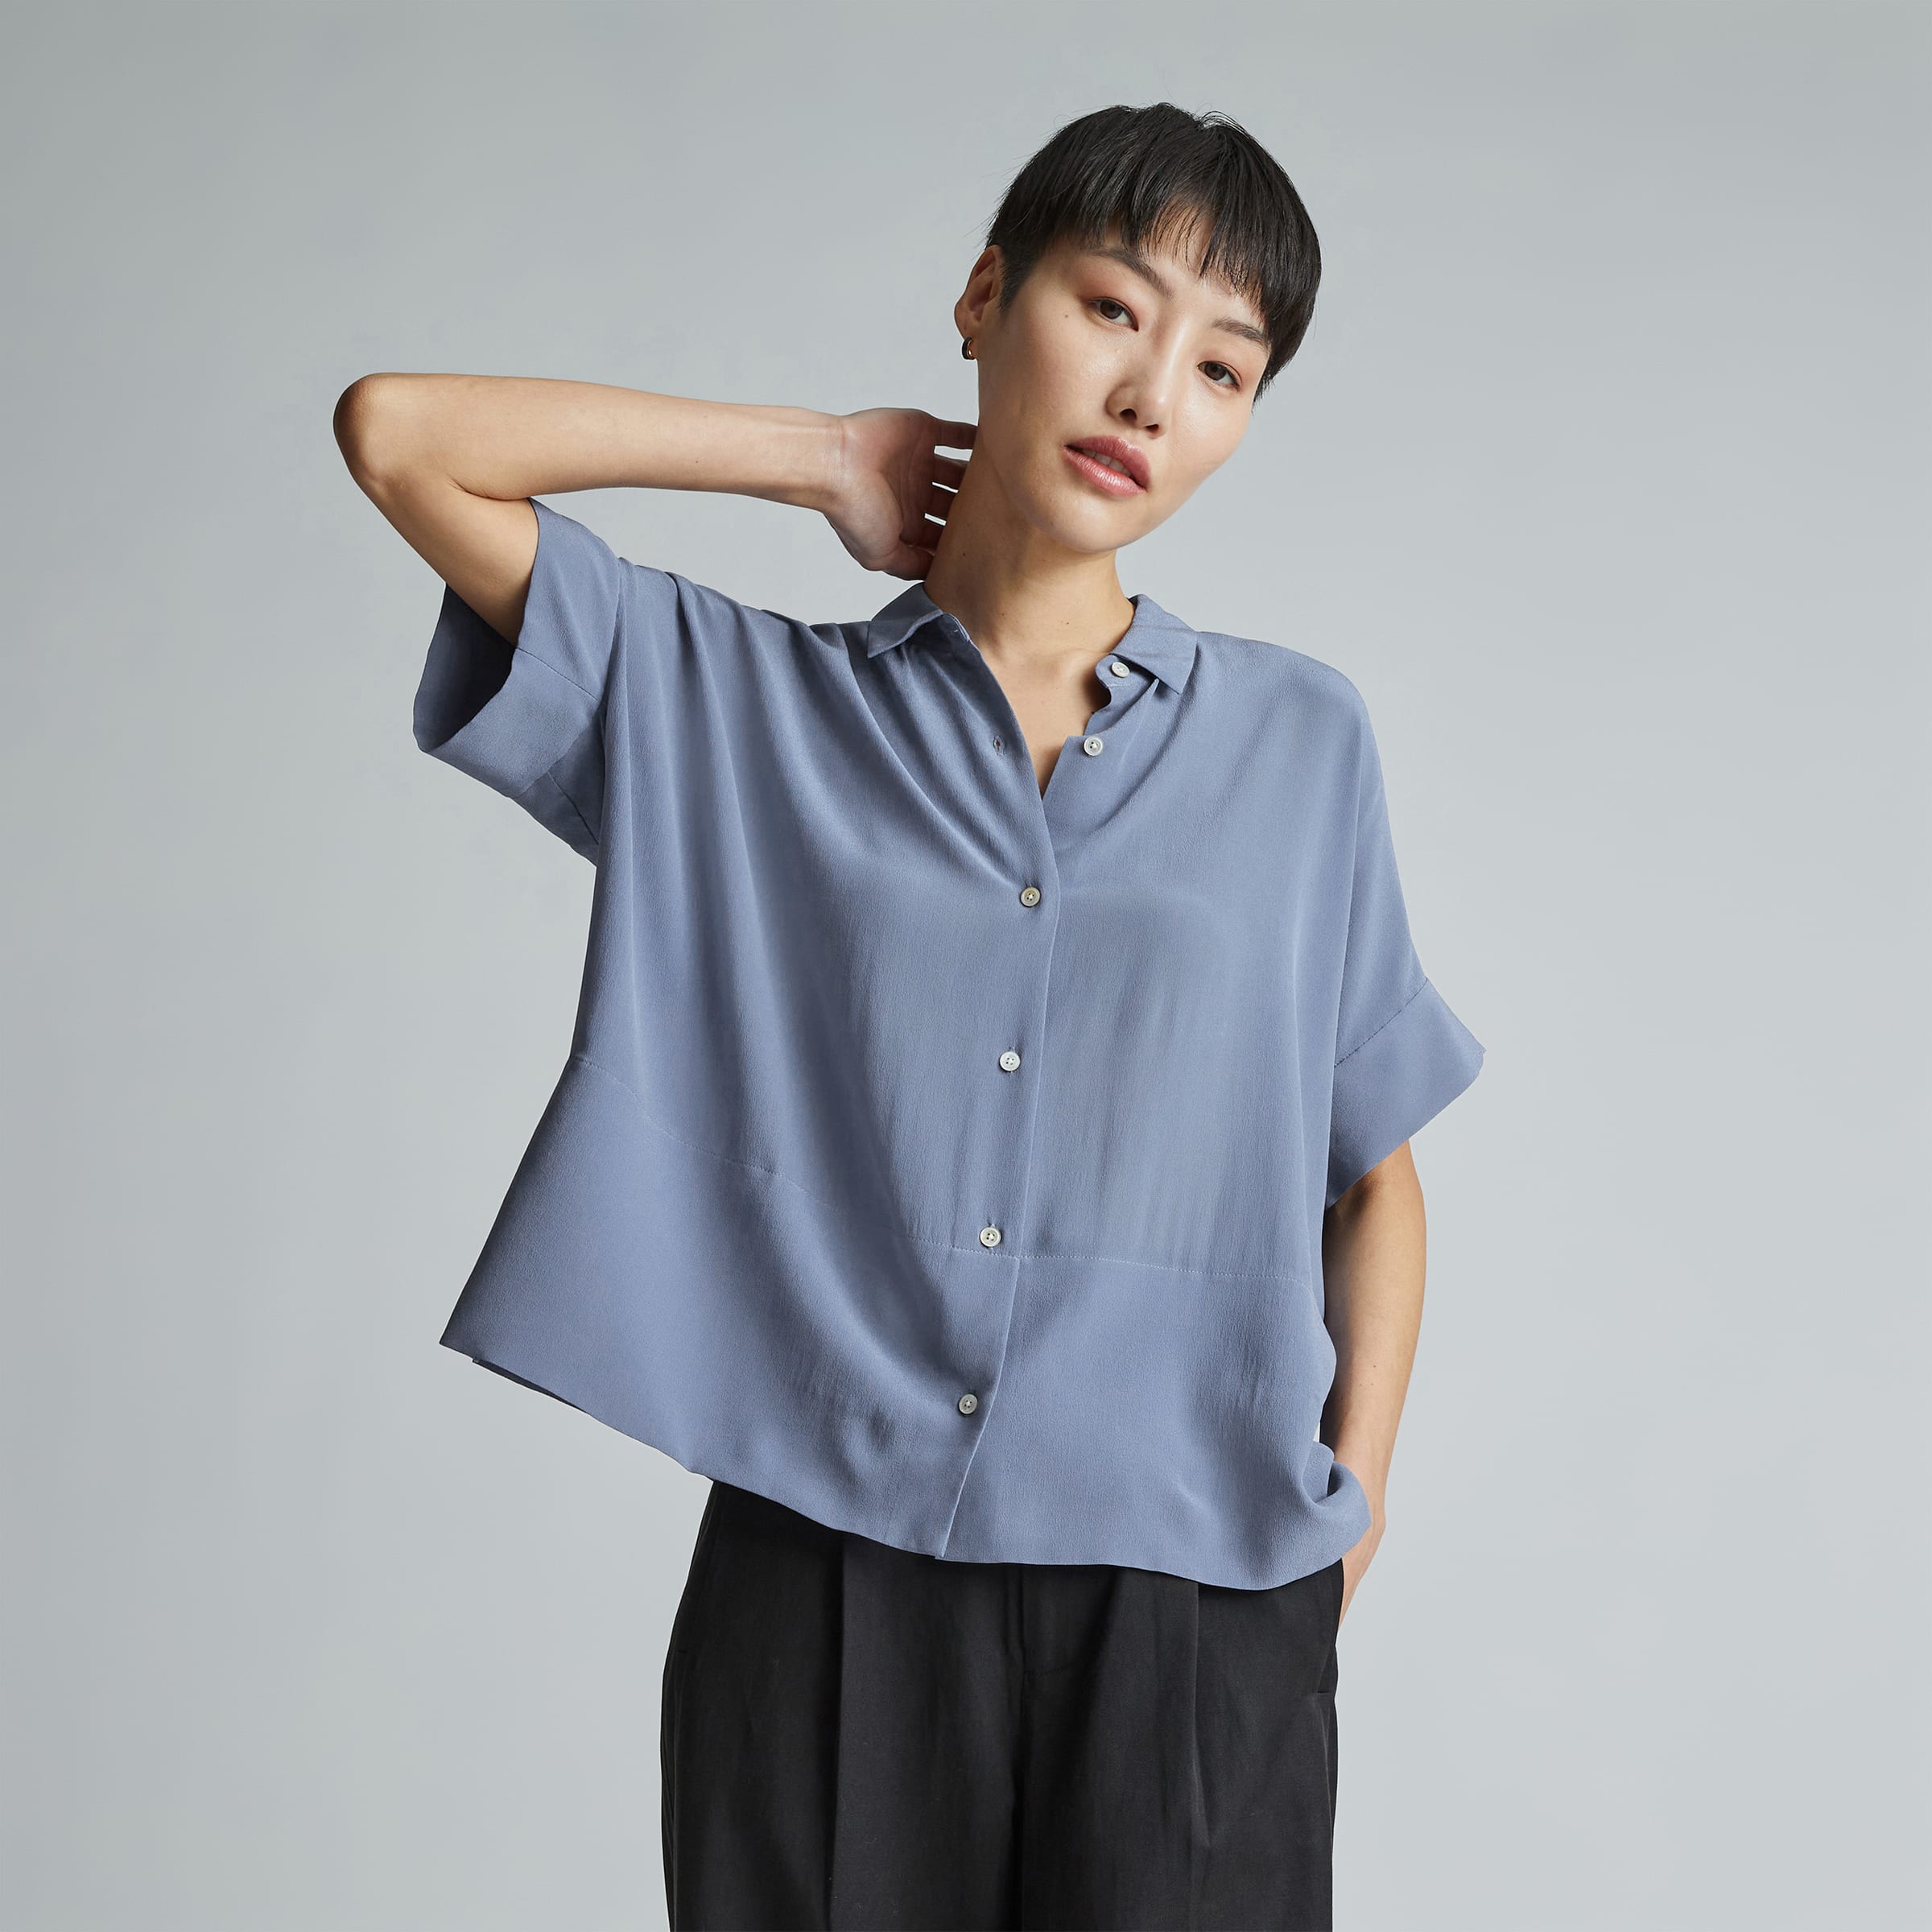 The Gathered Tie-Front Top